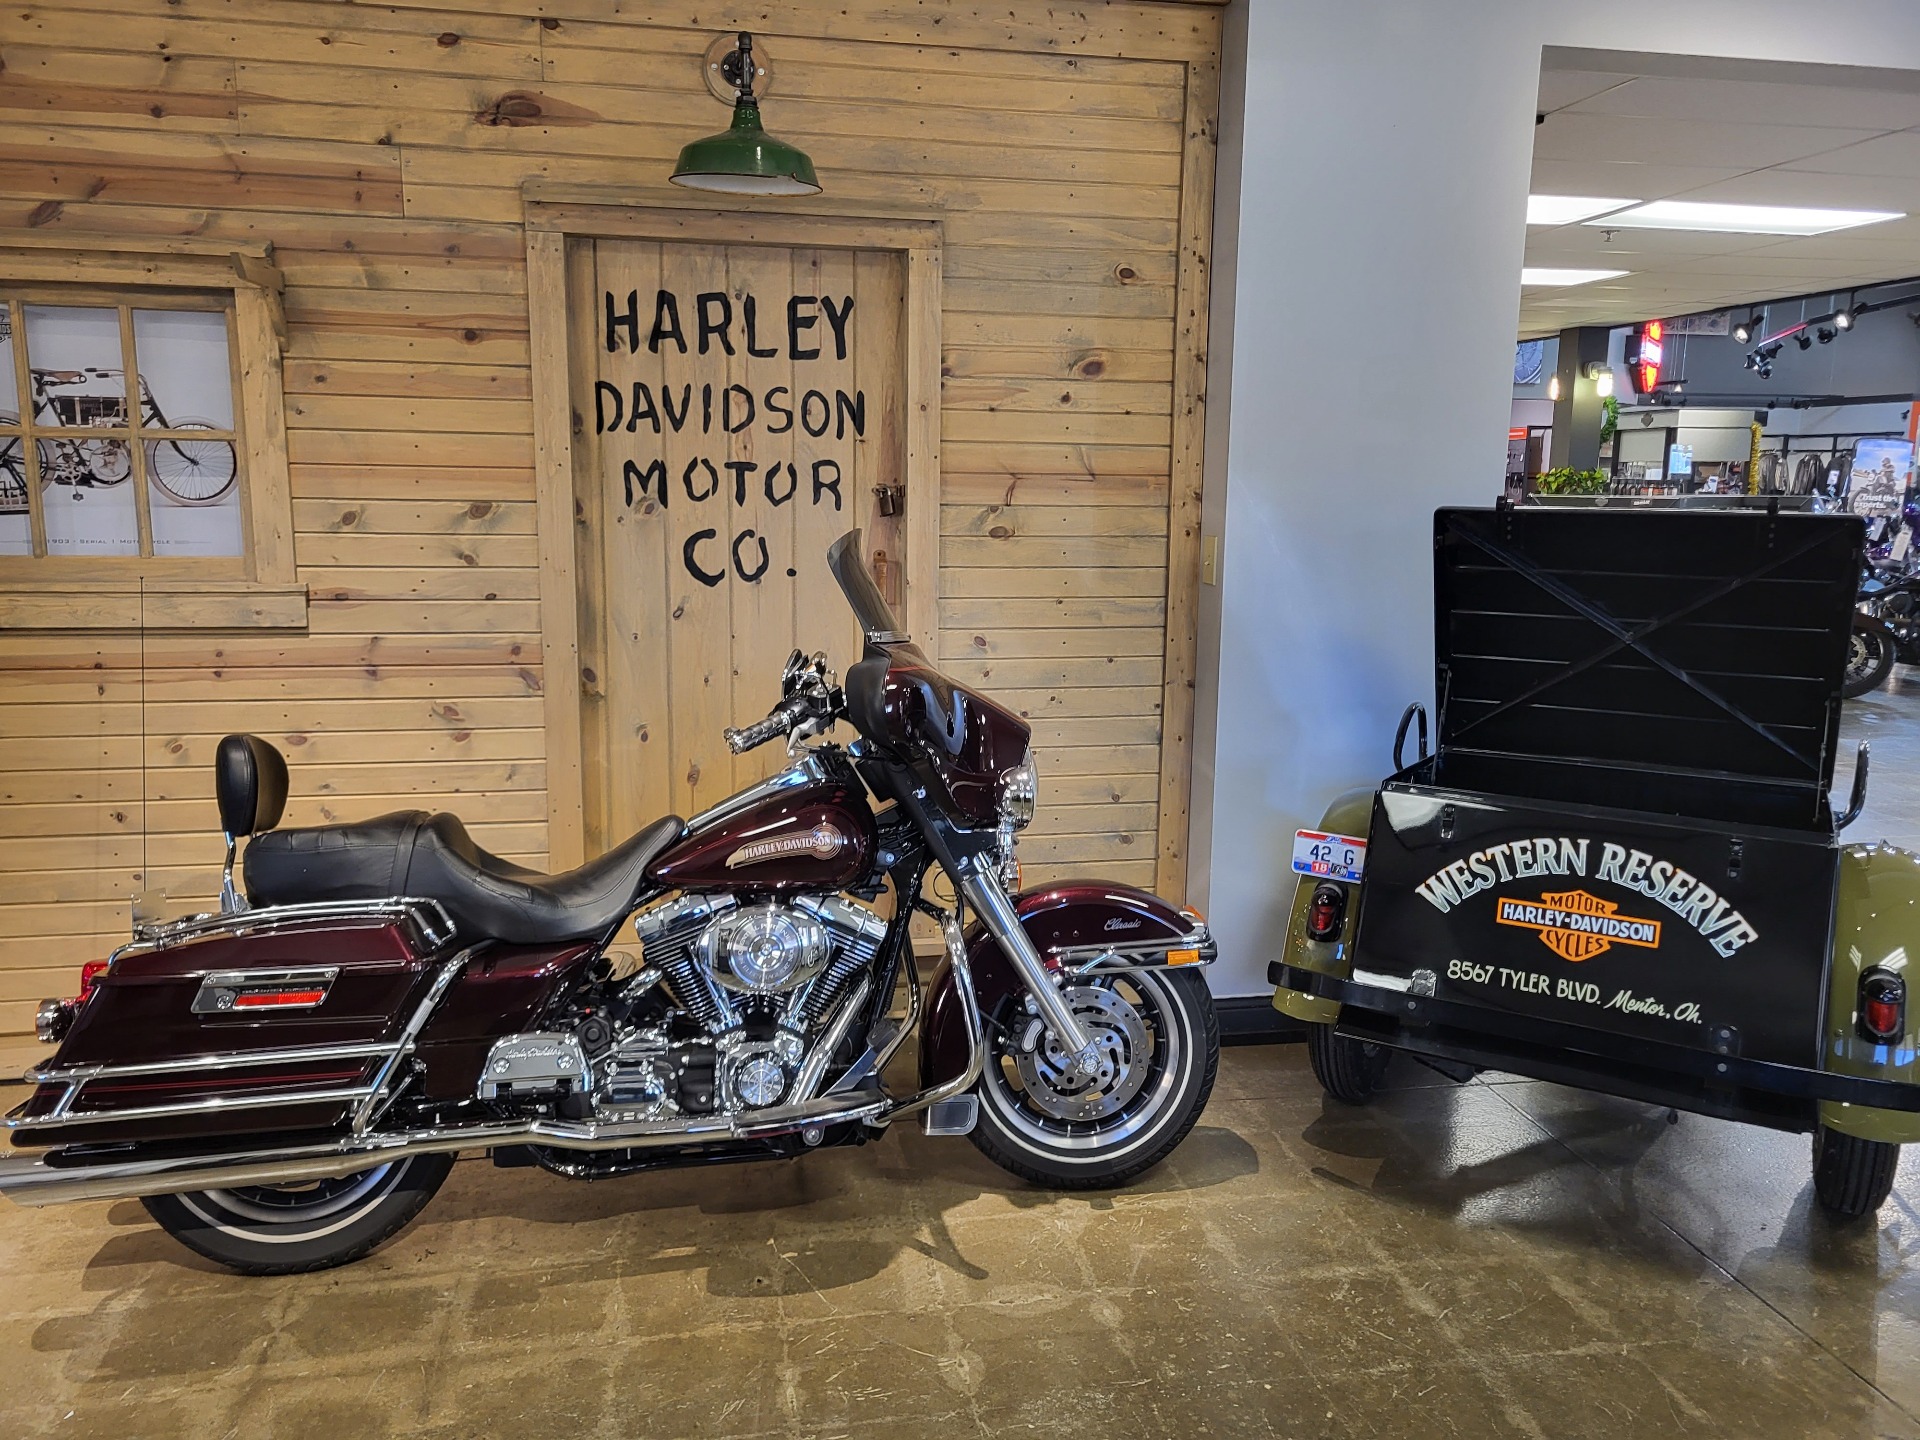 2006 Harley-Davidson Electra Glide® Classic in Mentor, Ohio - Photo 1